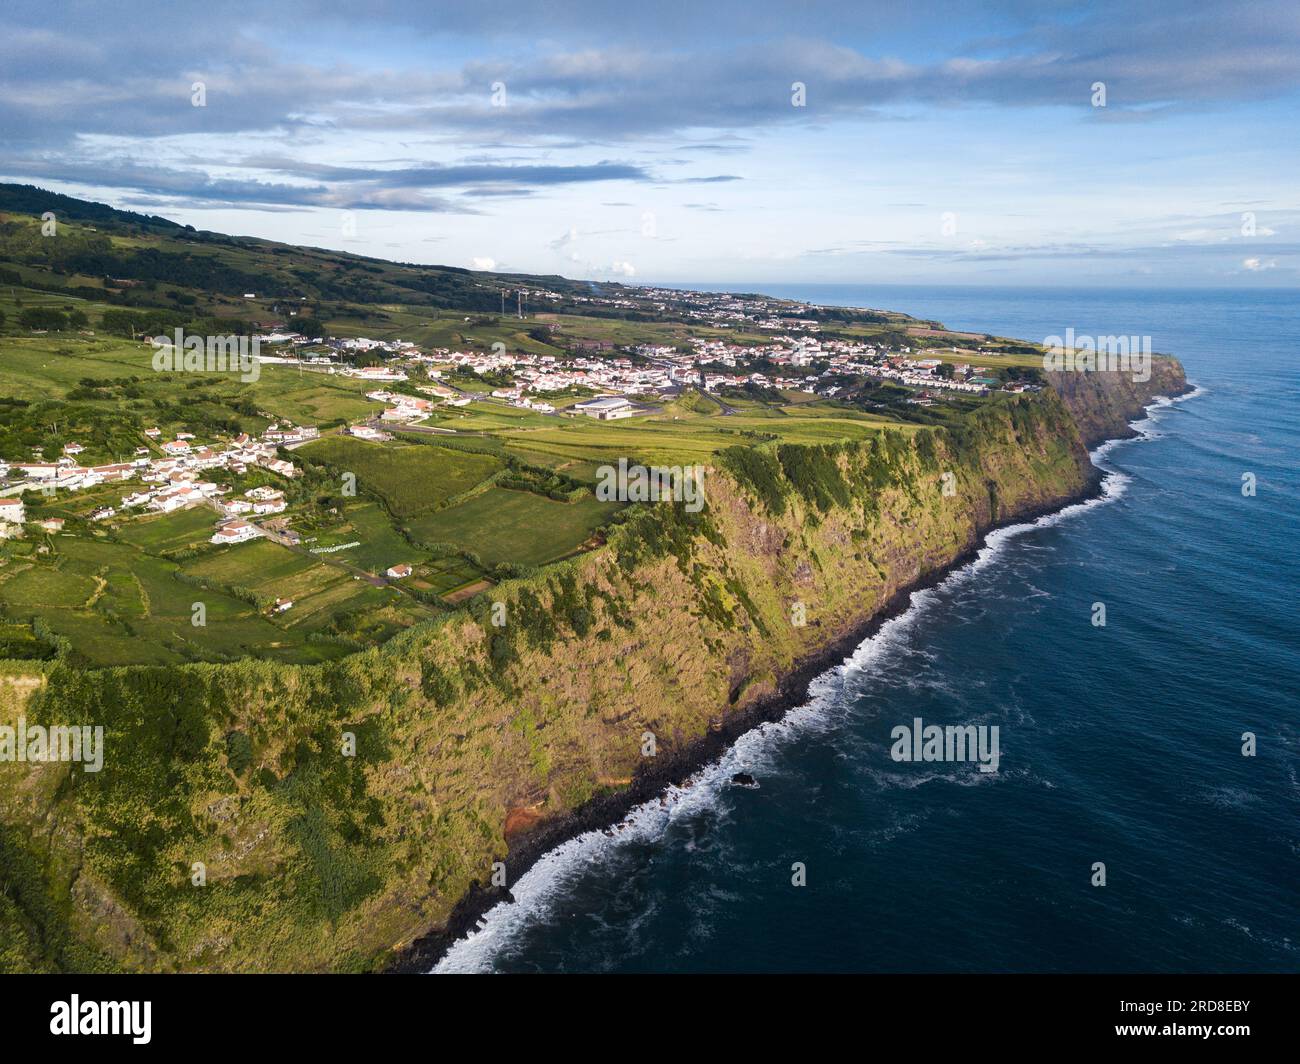 Cliffs and costline of Sao Miguel Island, Azores, Portugal, Atlantic, Europe Stock Photo